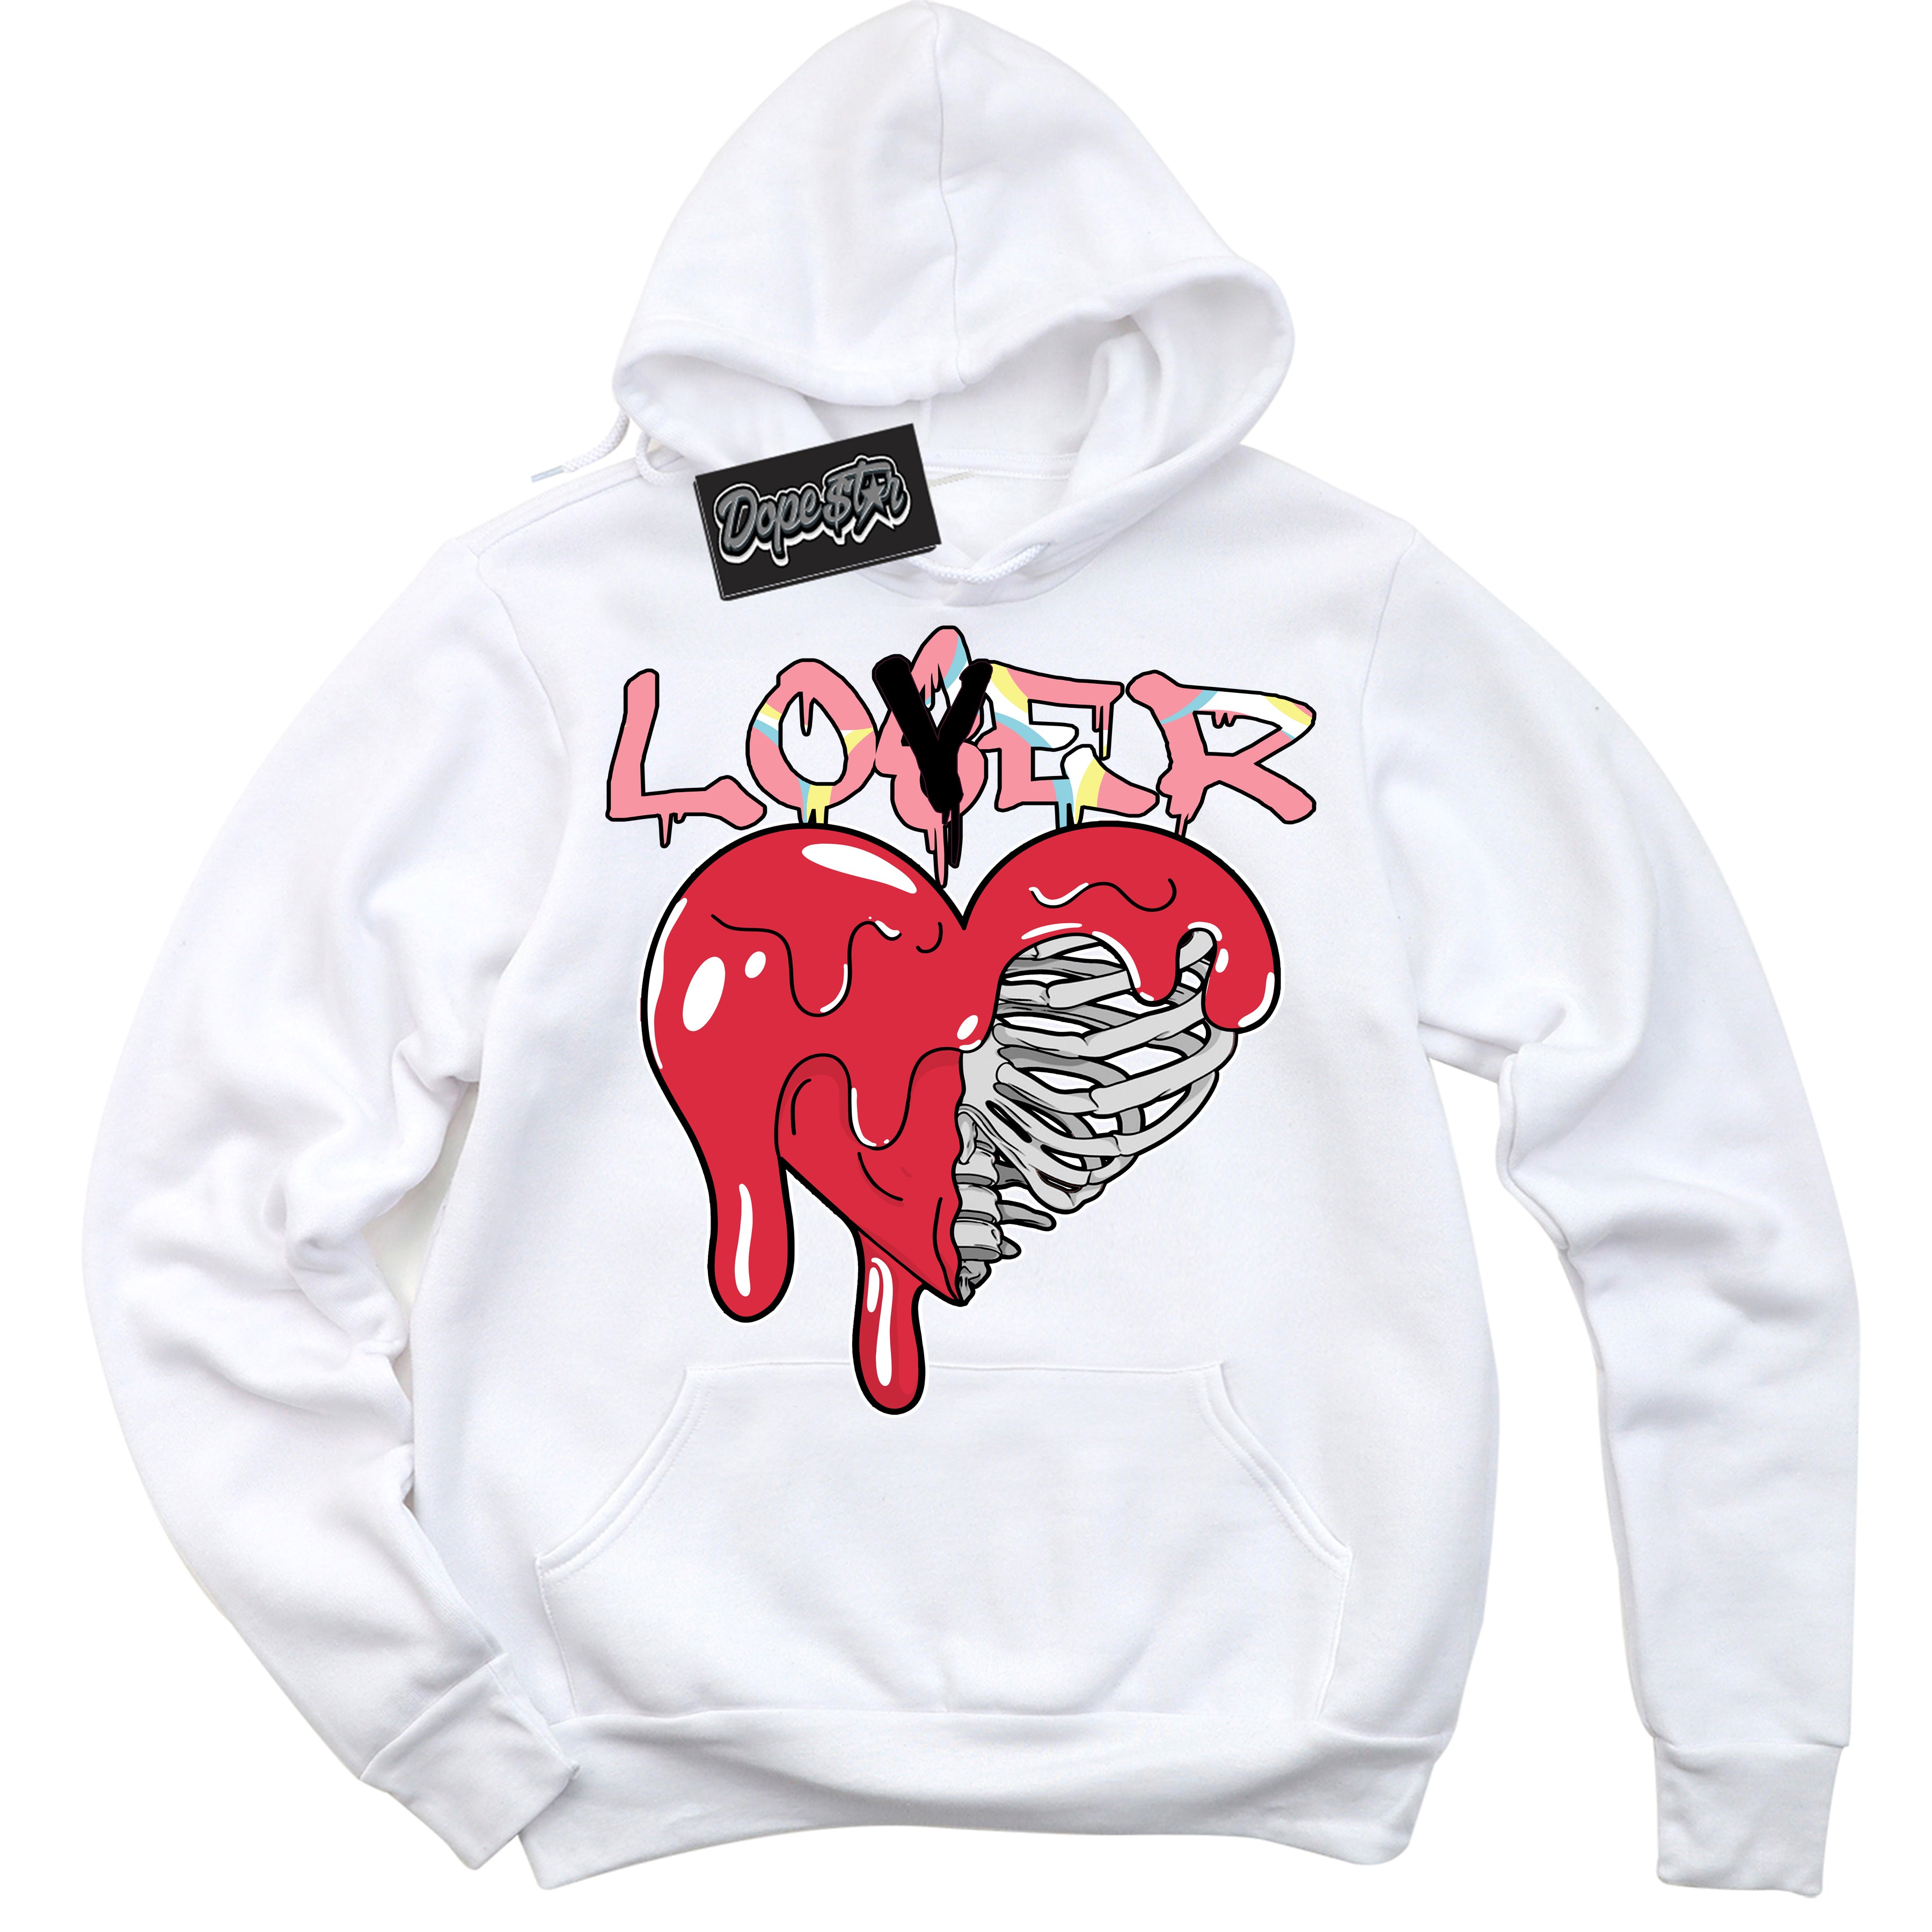 Cool White Graphic DopeStar Hoodie with “ Lover Loser “ print, that perfectly matches Spider-Verse 1s sneakers